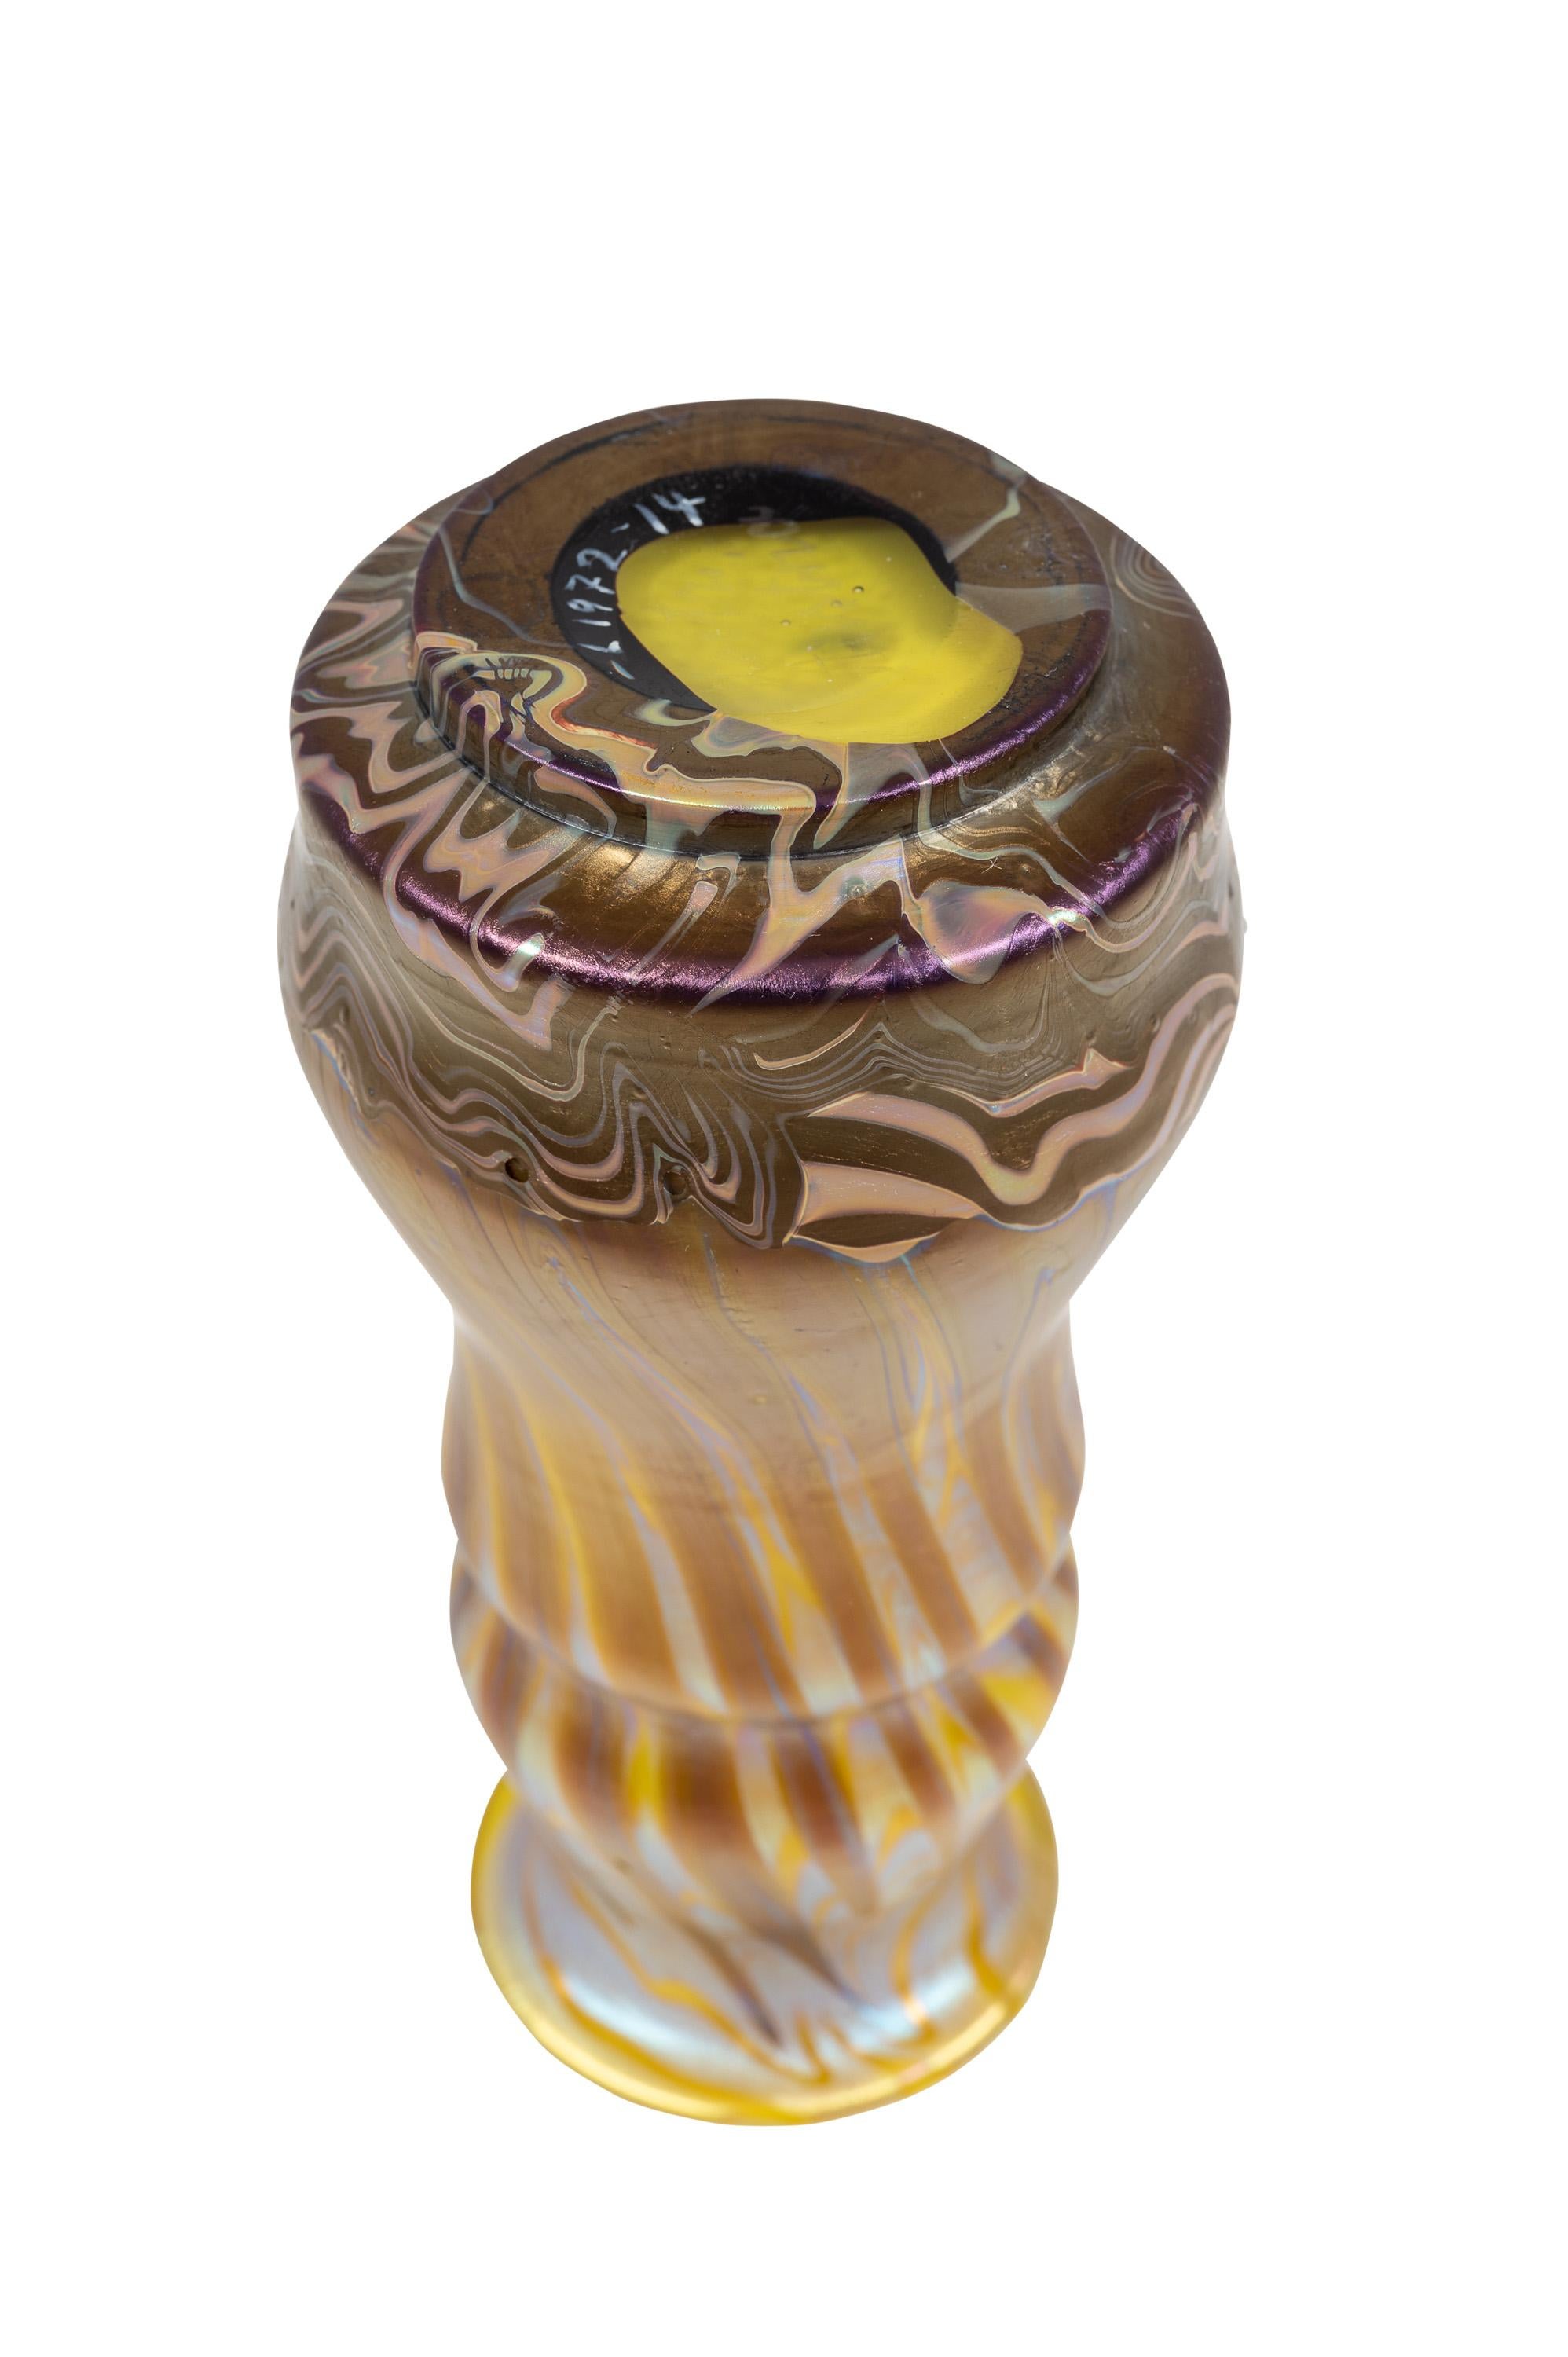 Bohemian Glass Vase Loetz PG 356 circa 1900 Viennese Art Nouveau signed In Good Condition For Sale In Klosterneuburg, AT